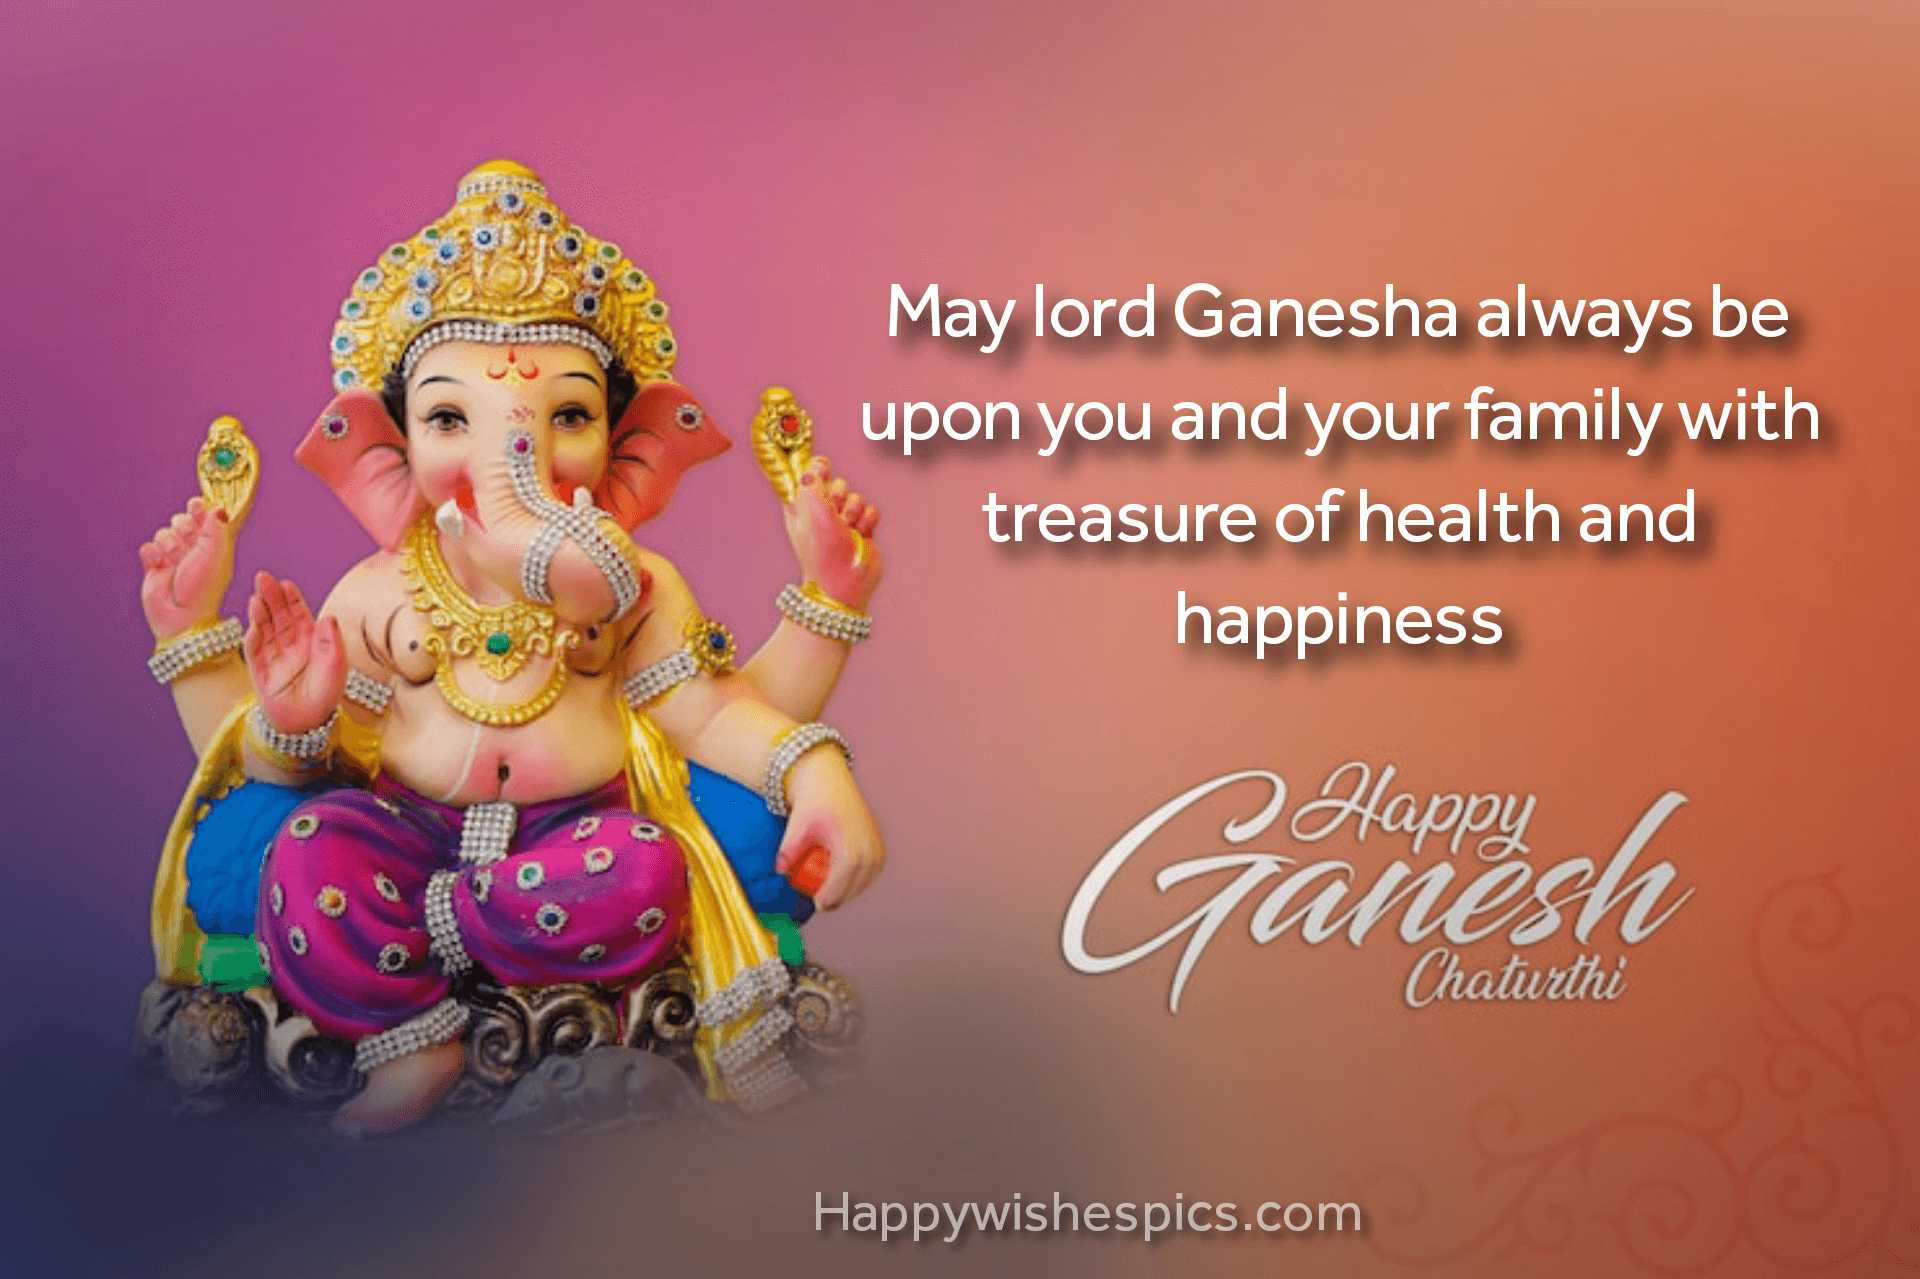 Ganesh Chaturthi Wishes Quotes And Greetings Happy Wishes 3387